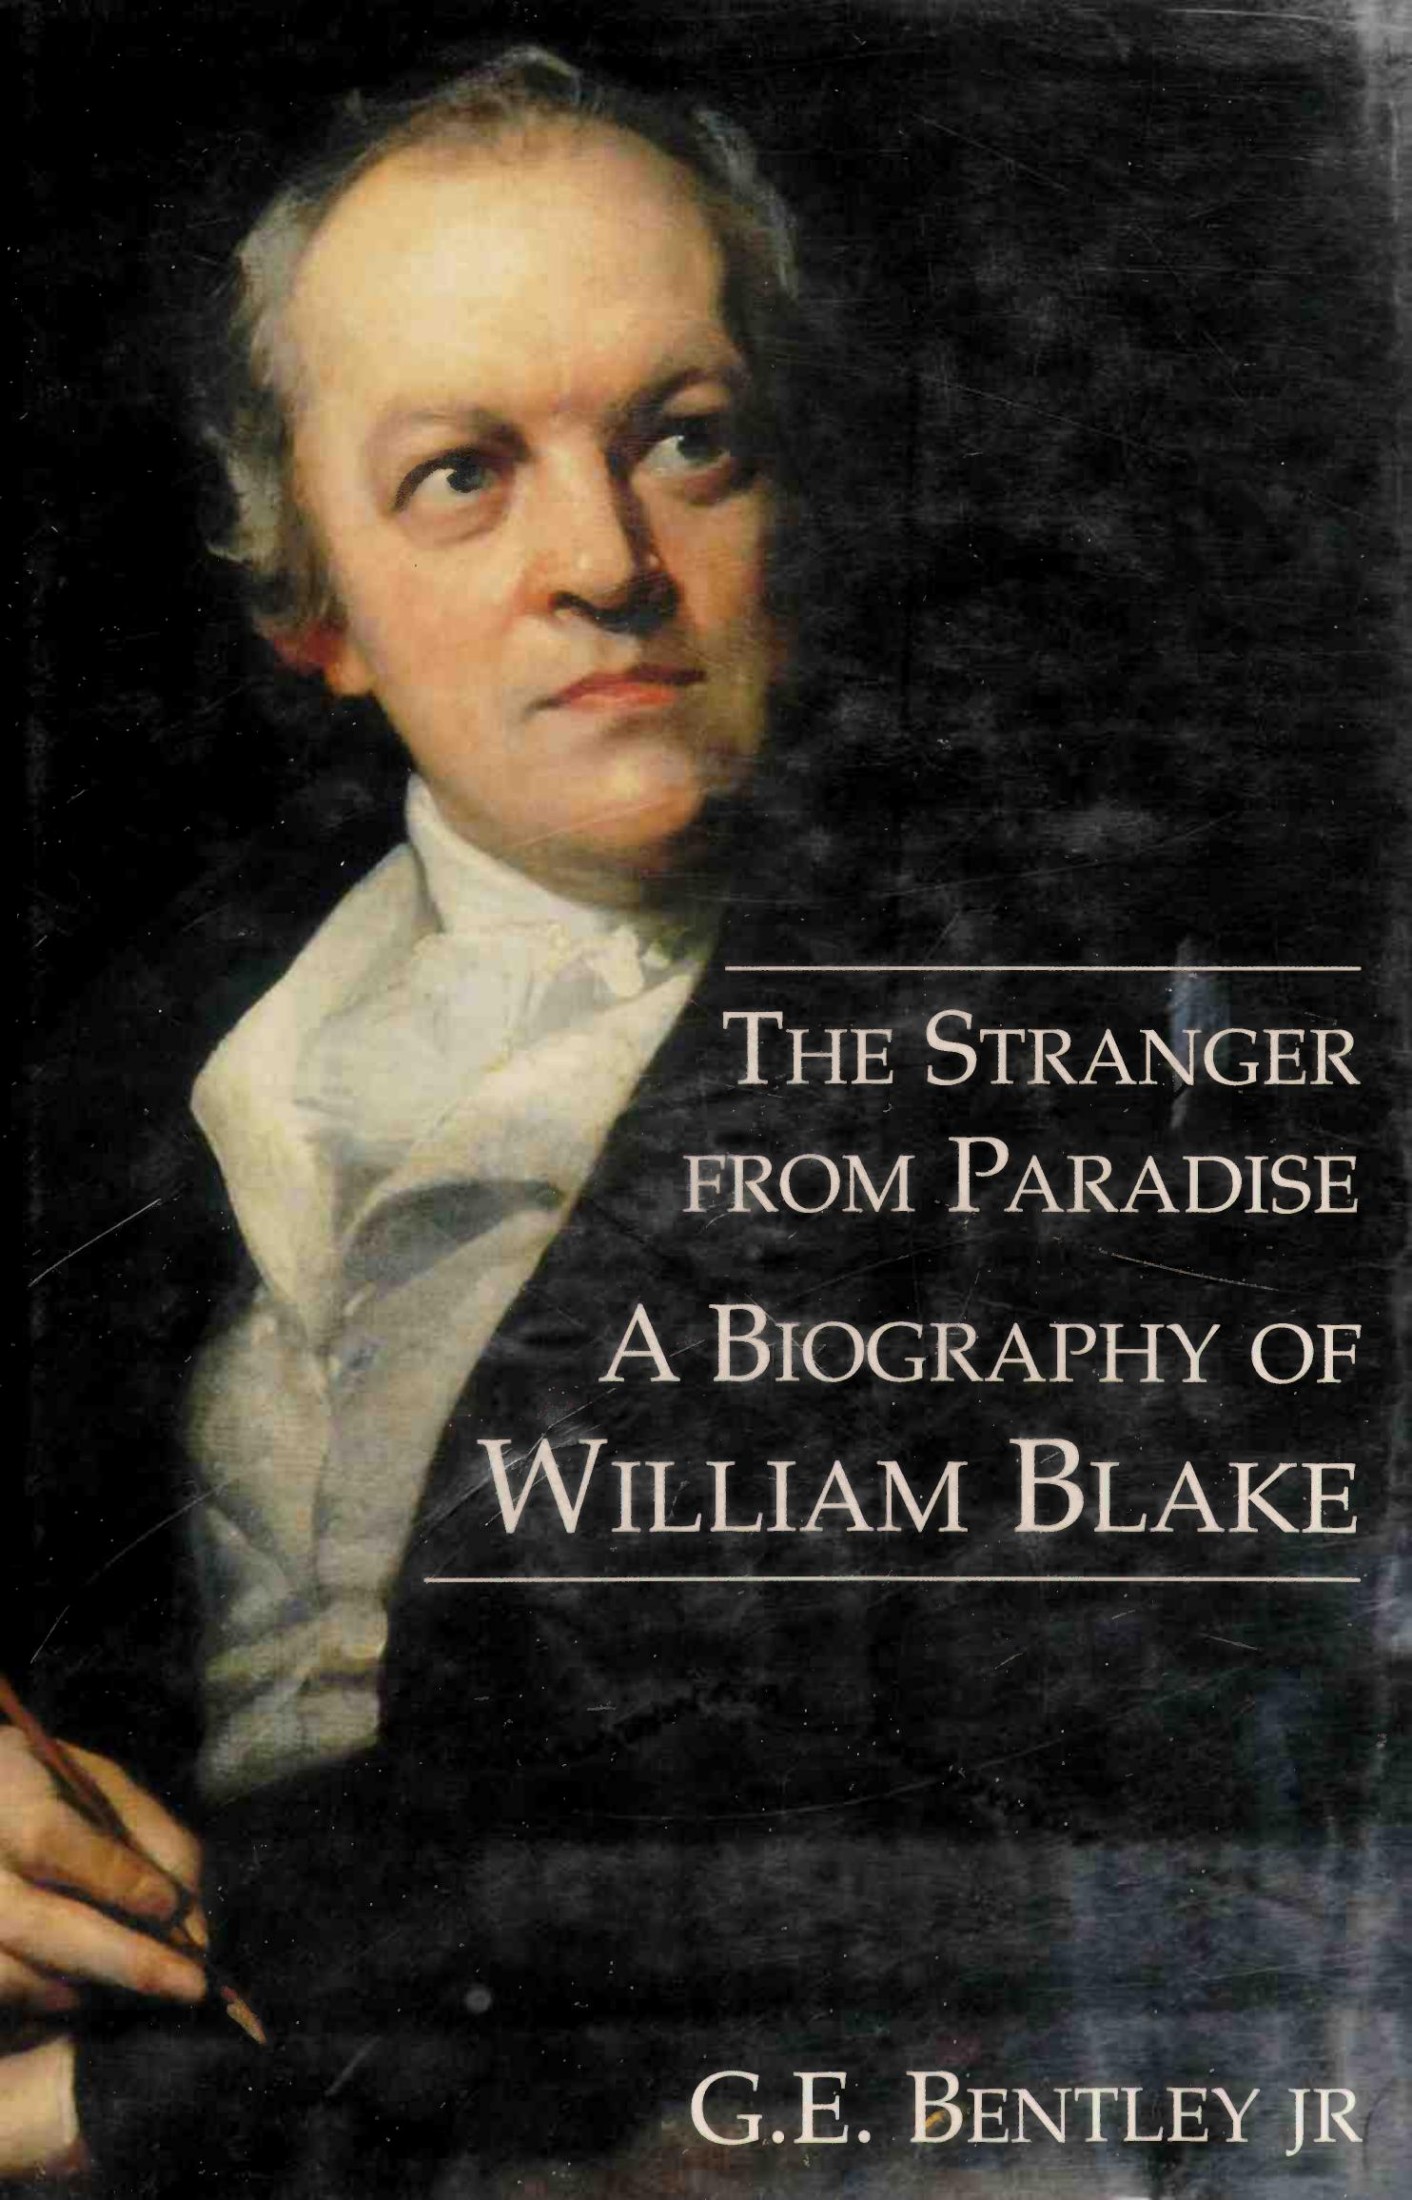 The Stranger From Paradise: A Biography of William Blake